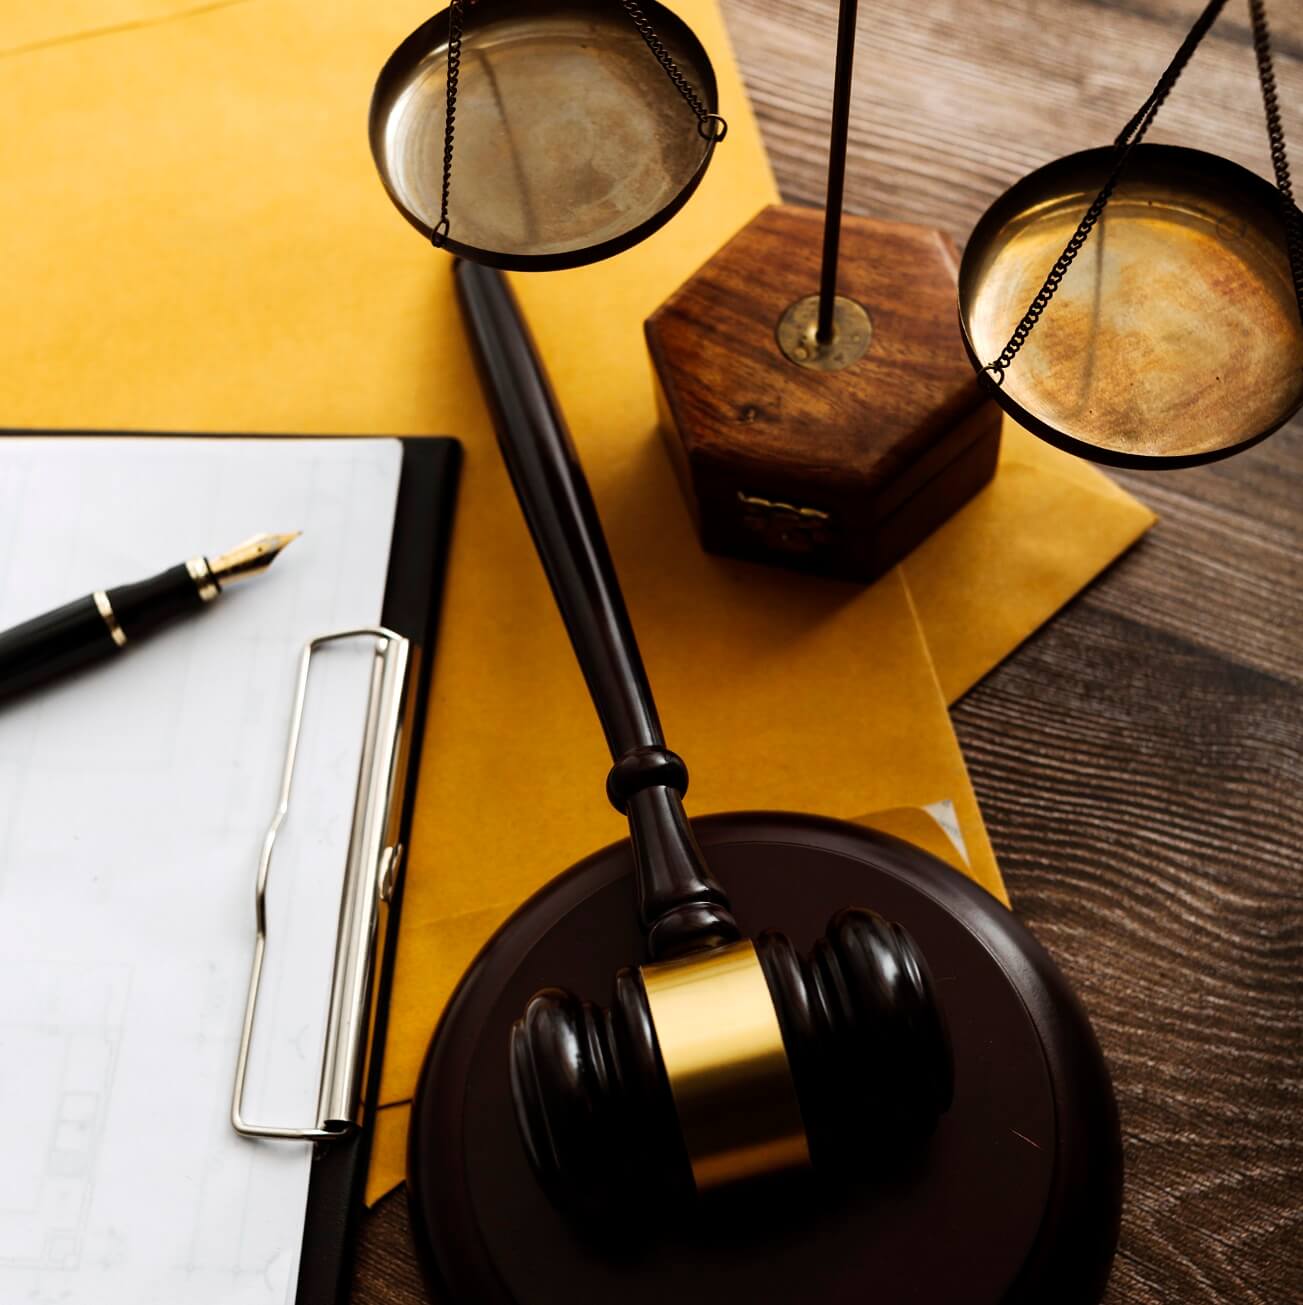 Court gavel and scales near divorce documents